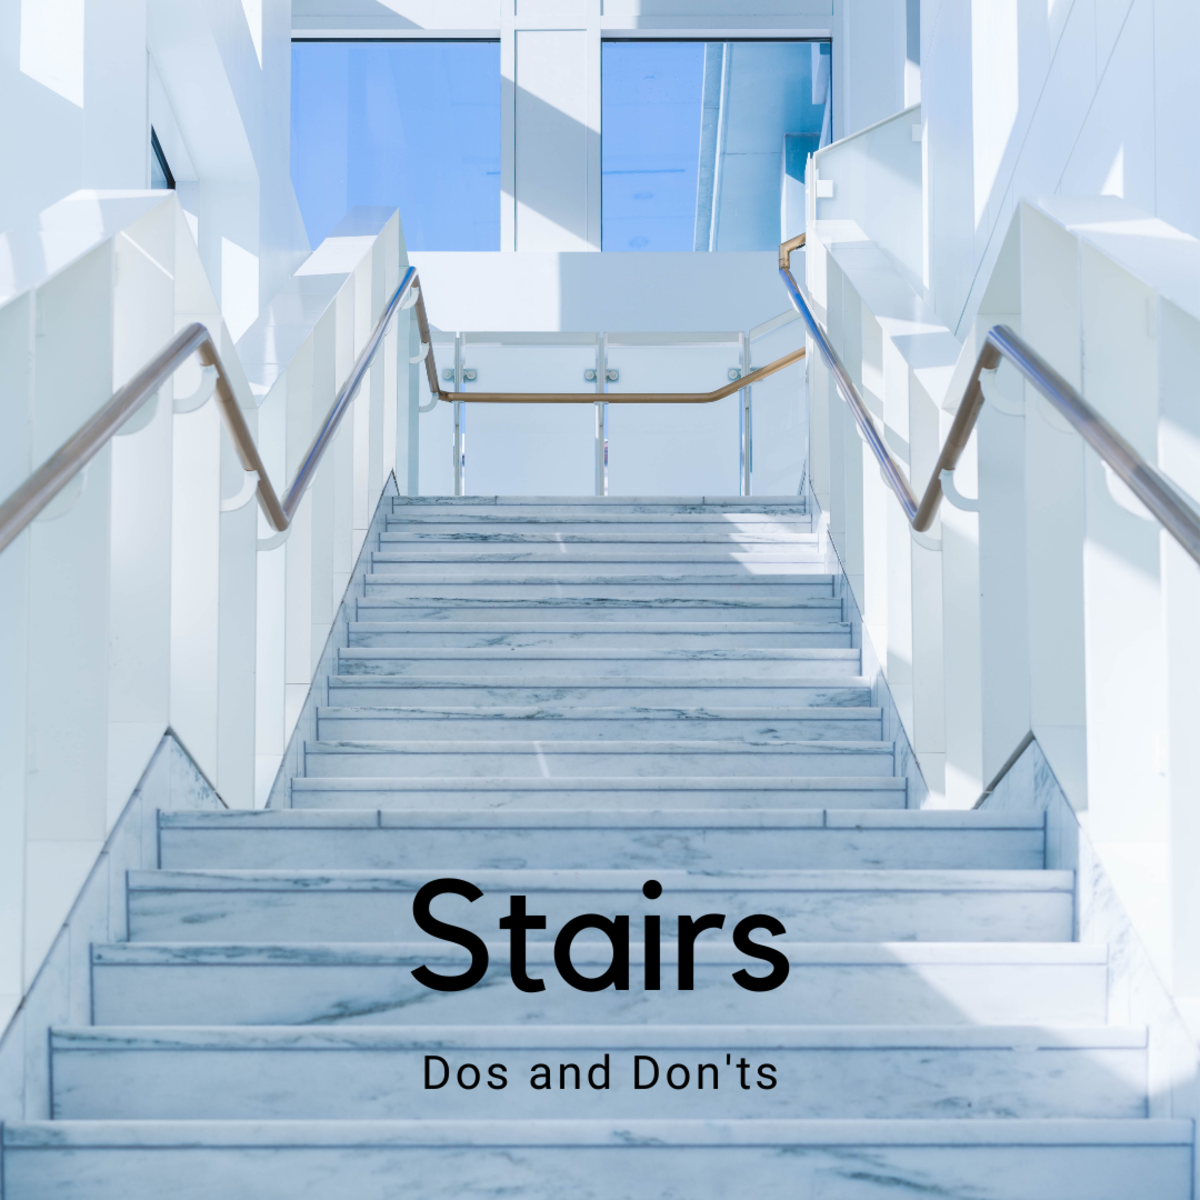 Learn the etiquette for stairs